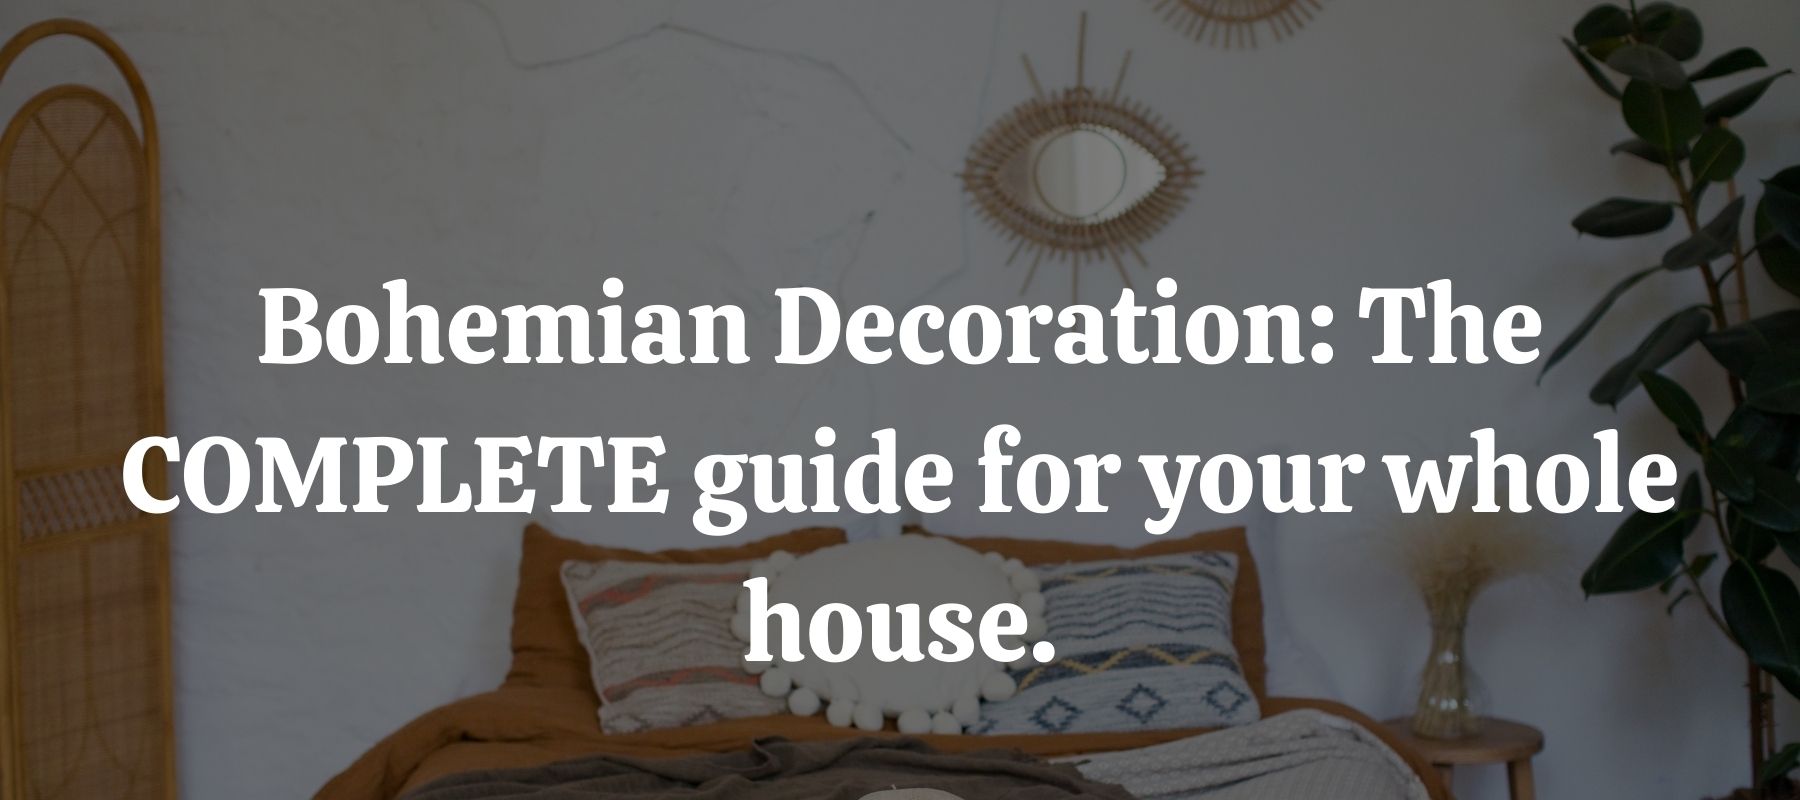 Bohemian Decoration The COMPLETE guide for your whole house